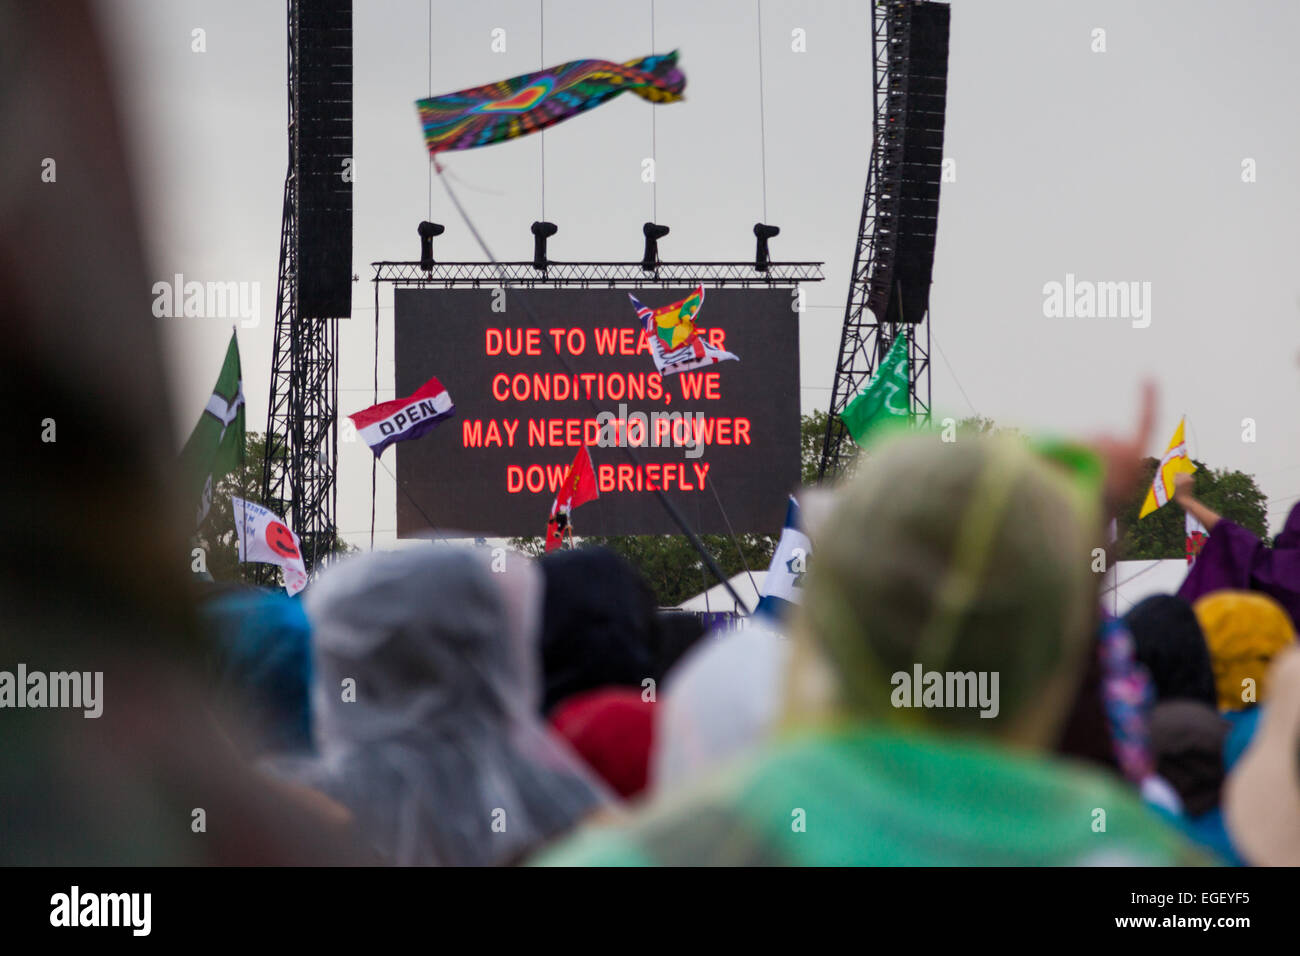 GLASTONBURY, UK - JUNE 27, 2014 : A big screen at the Pyramid Stage of Glastonbury Festival warns of an imminent power outage Stock Photo